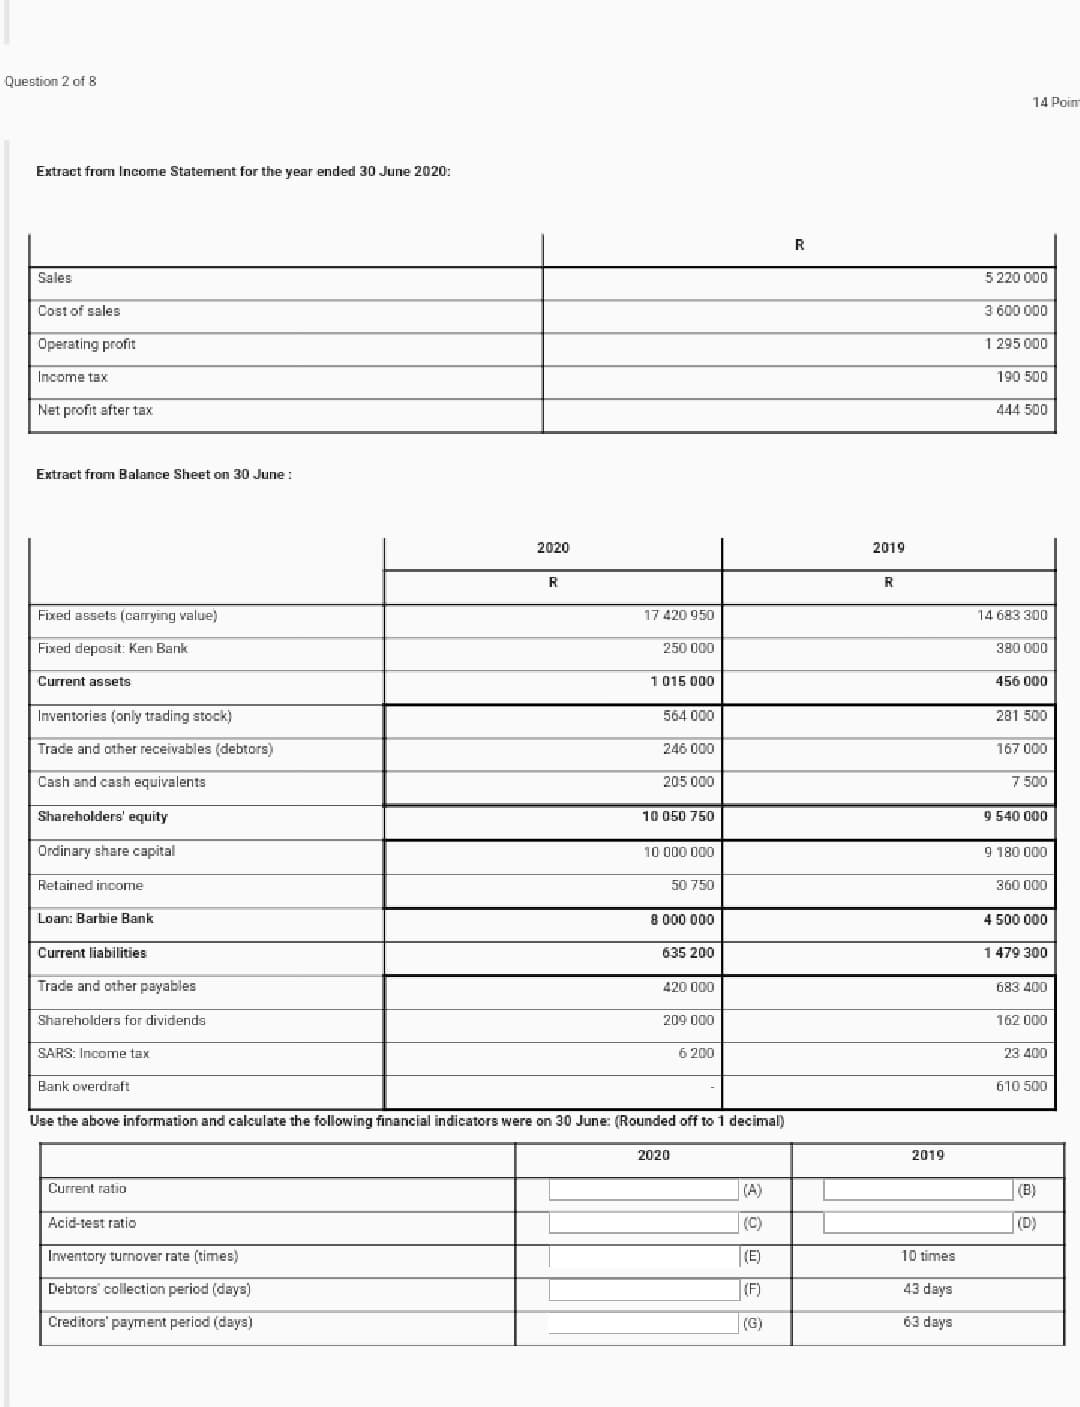 Question 2 of 8
14 Poin
Extract from Income Statement for the year ended 30 June 2020:
R
Sales
5 220 000
Cost of sales
3 600 000
Operating profit
1 295 000
Income tax
190 500
Net profit after tax
444 500
Extract from Balance Sheet on 30 June :
2020
2019
R
R
Fixed assets (carrying value)
17 420 950
14 683 300
Fixed deposit: Ken Bank
250 000
380 000
Current assets
1015 000
456 000
Inventories (only trading stock)
564 000
281 500
Trade and other receivables (debtors)
246 000
167 000
Cash and cash equivalents
205 000
7 500
Shareholders' equity
10 050 750
9 540 000
Ordinary share capital
10 000 000
9 180 000
Retained income
50 750
360 000
Loan: Barbie Bank
8 000 000
4 500 000
Current liabilities
635 200
1 479 300
Trade and other payables
420 000
683 400
Shareholders for dividends
209 000
162 000
SARS: Income tax
6 200
23 400
Bank overdraft
610 500
Use the above information and calculate the following financial indicators were on 30 June: (Rounded off to 1 decimal)
2020
2019
Current ratio
(A)
(B)
Acid-test ratio
(C)
|(D)
Inventory turnover rate (times)
(E)
10 times
Debtors' collection period (days)
(F)
43 days
Creditors' payment period (days)
(G)
63 days
